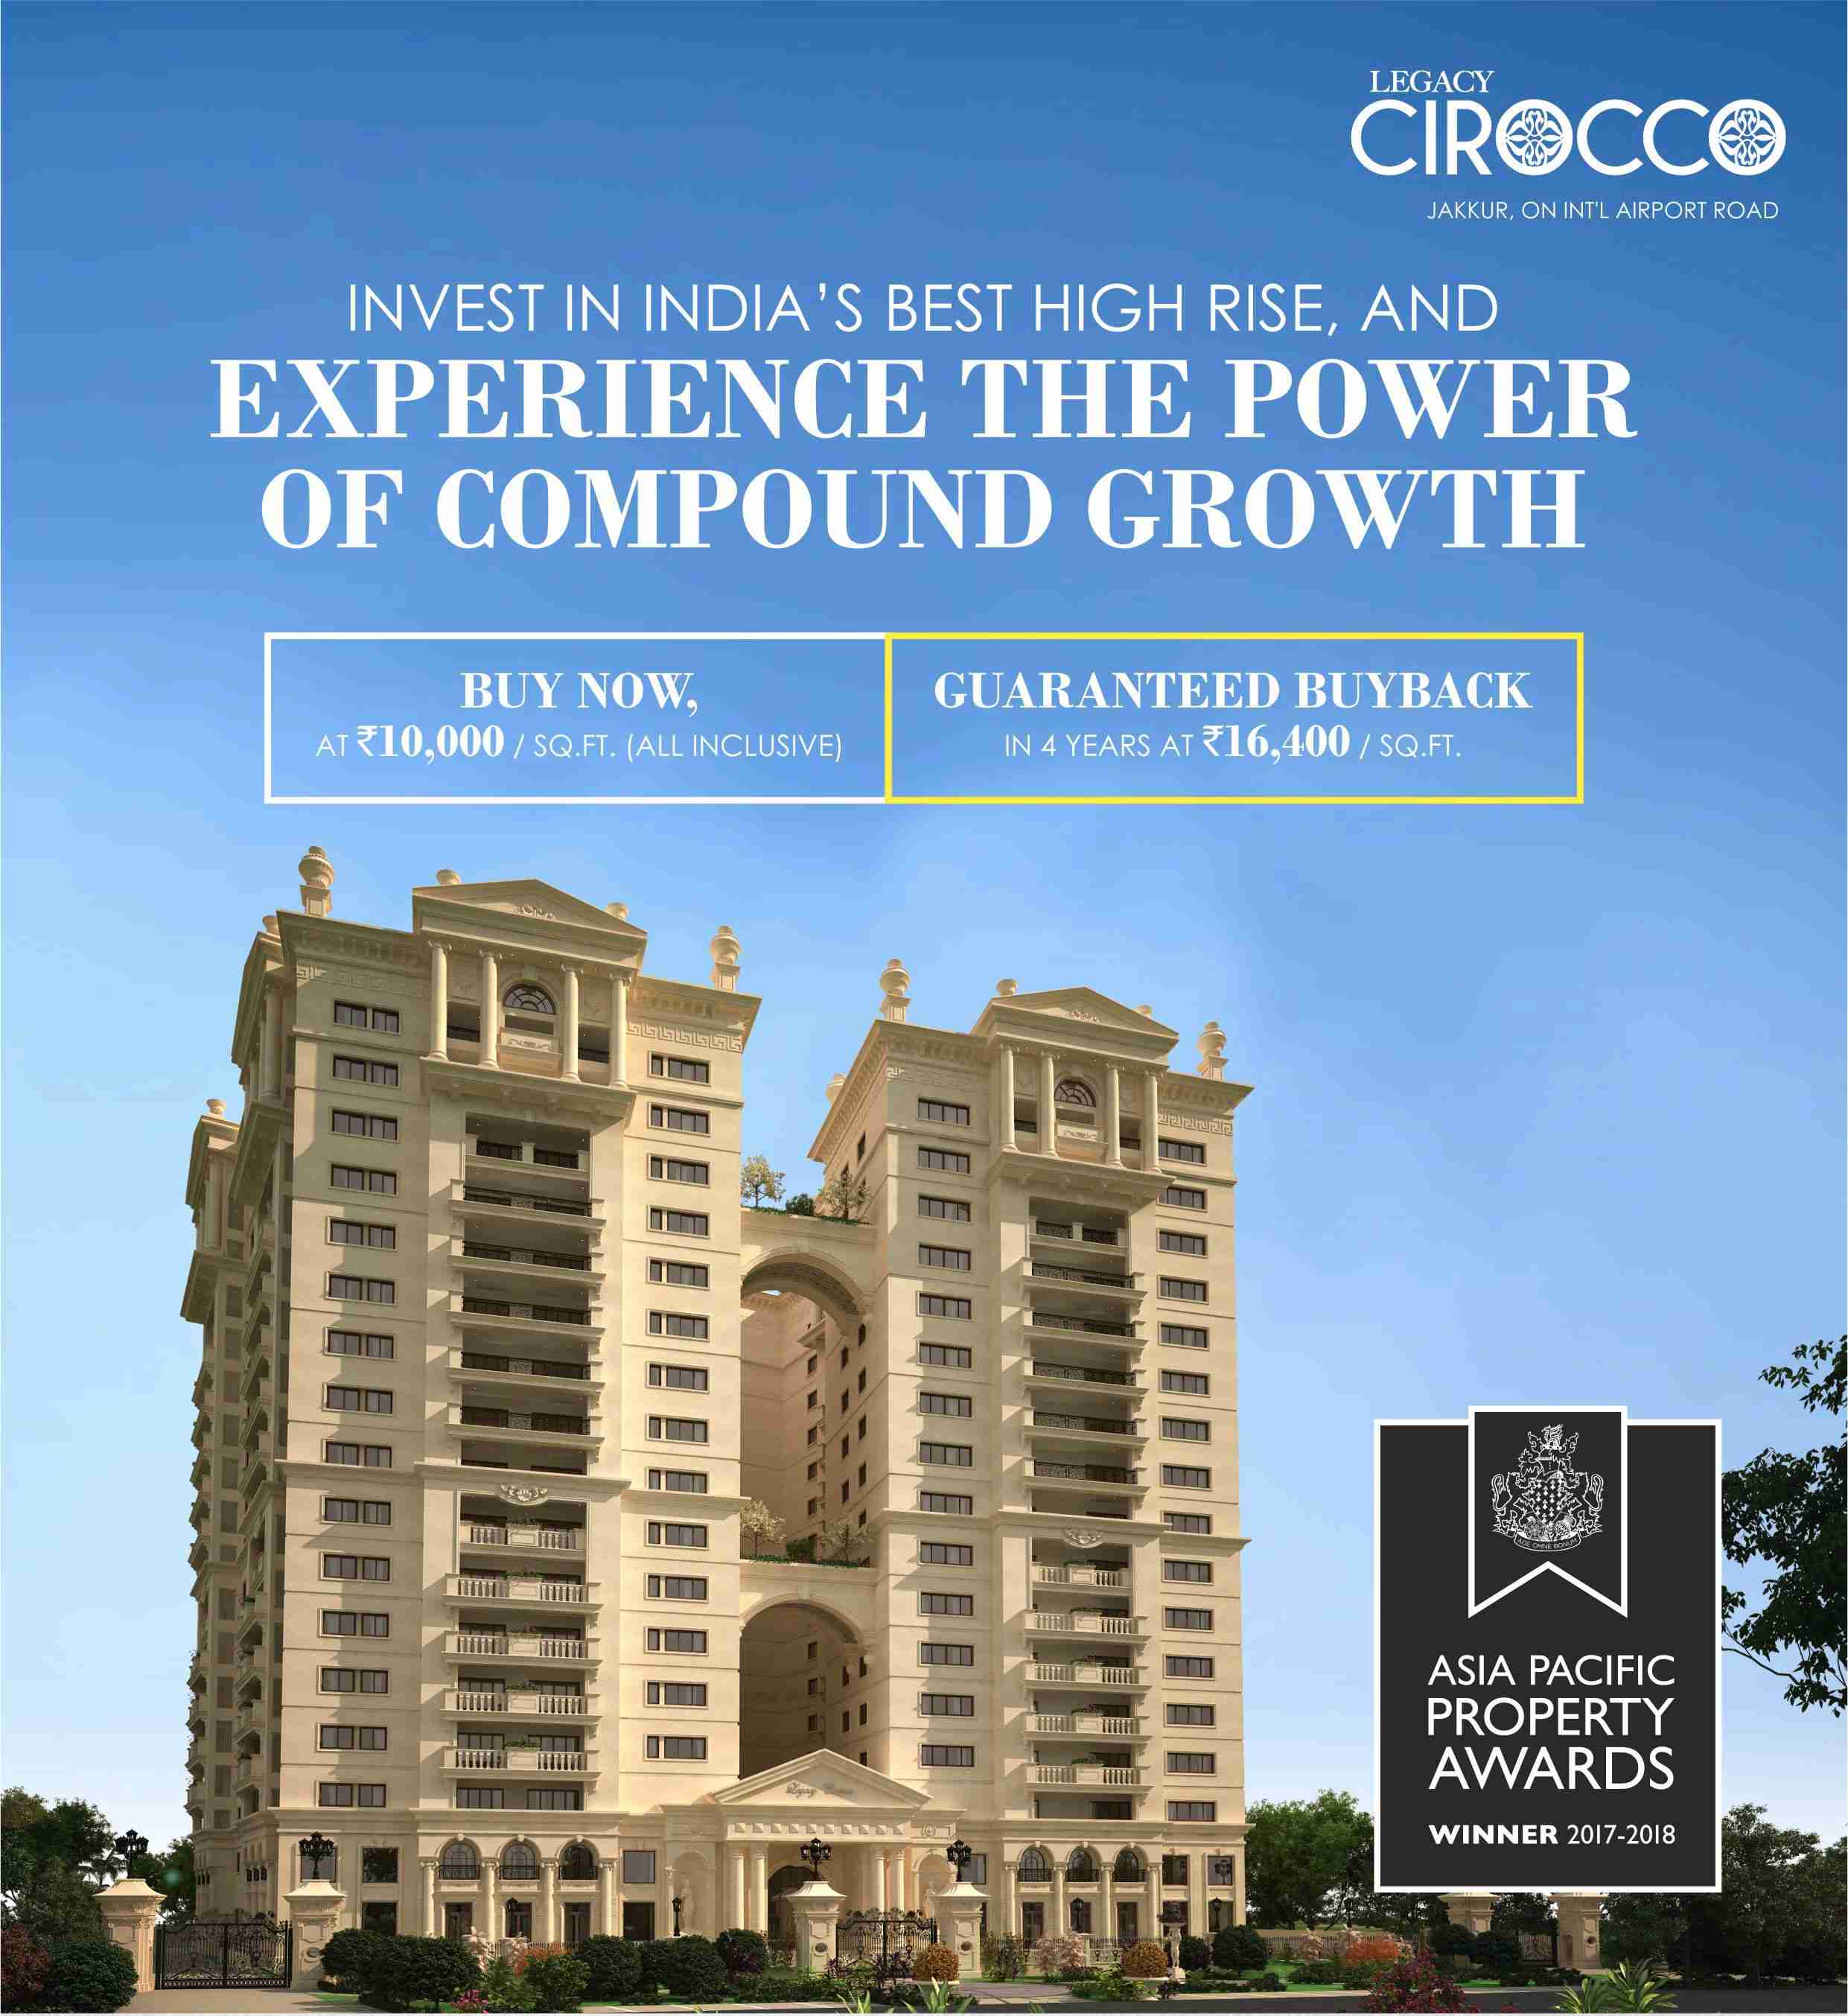 Legacy Cirocco Offers Guaranteed Buyback On India's Best High Rise Update